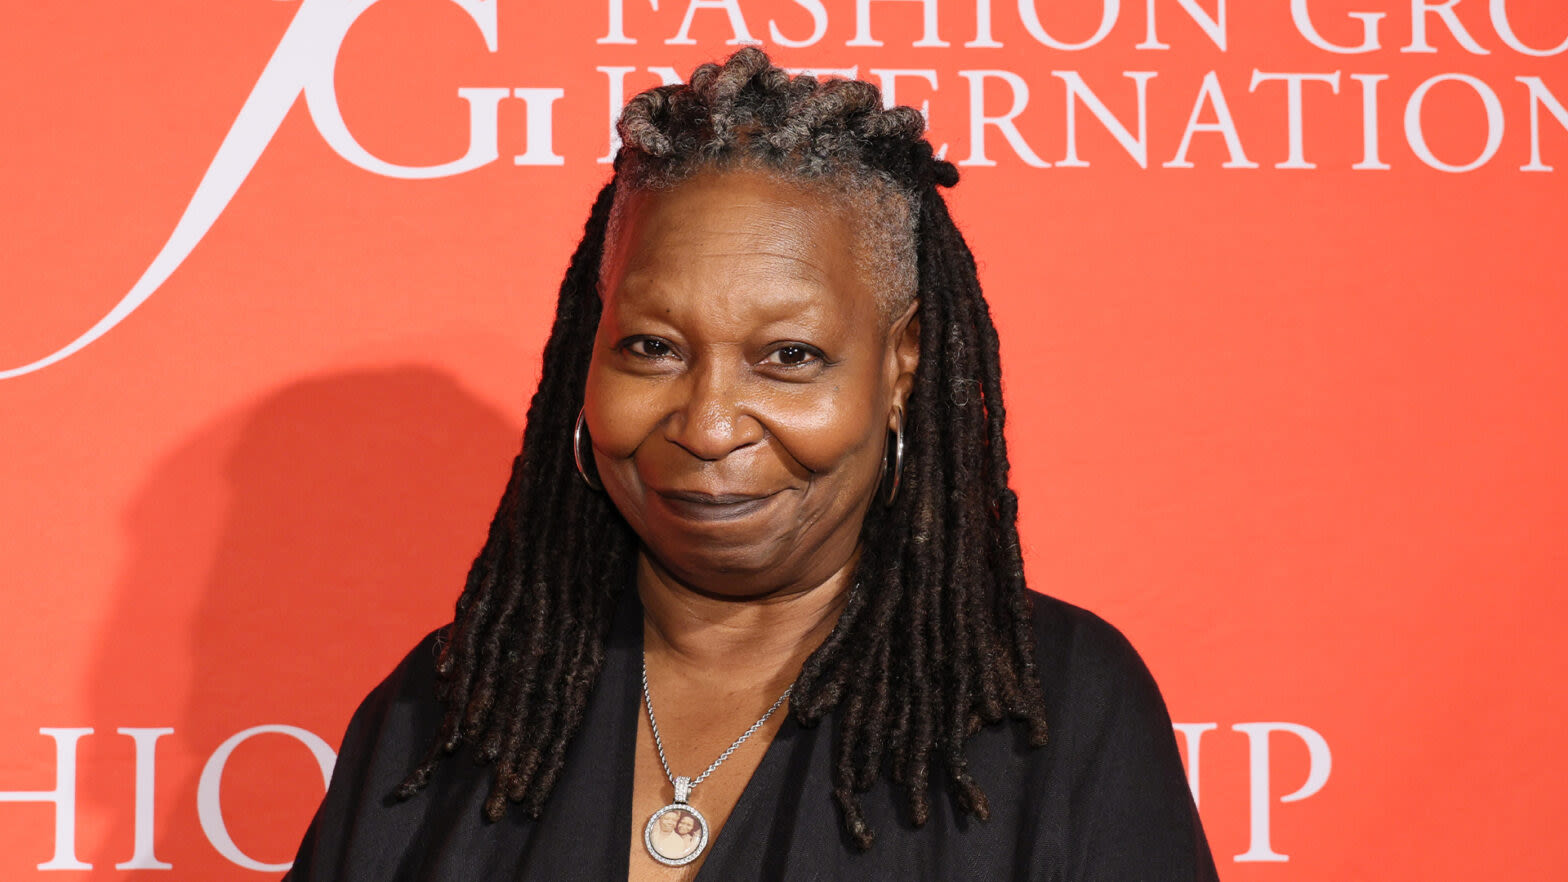 Whoopi Goldberg Honored For Launching First Branded, Tested Woman-Owned Cannabis Brand In California